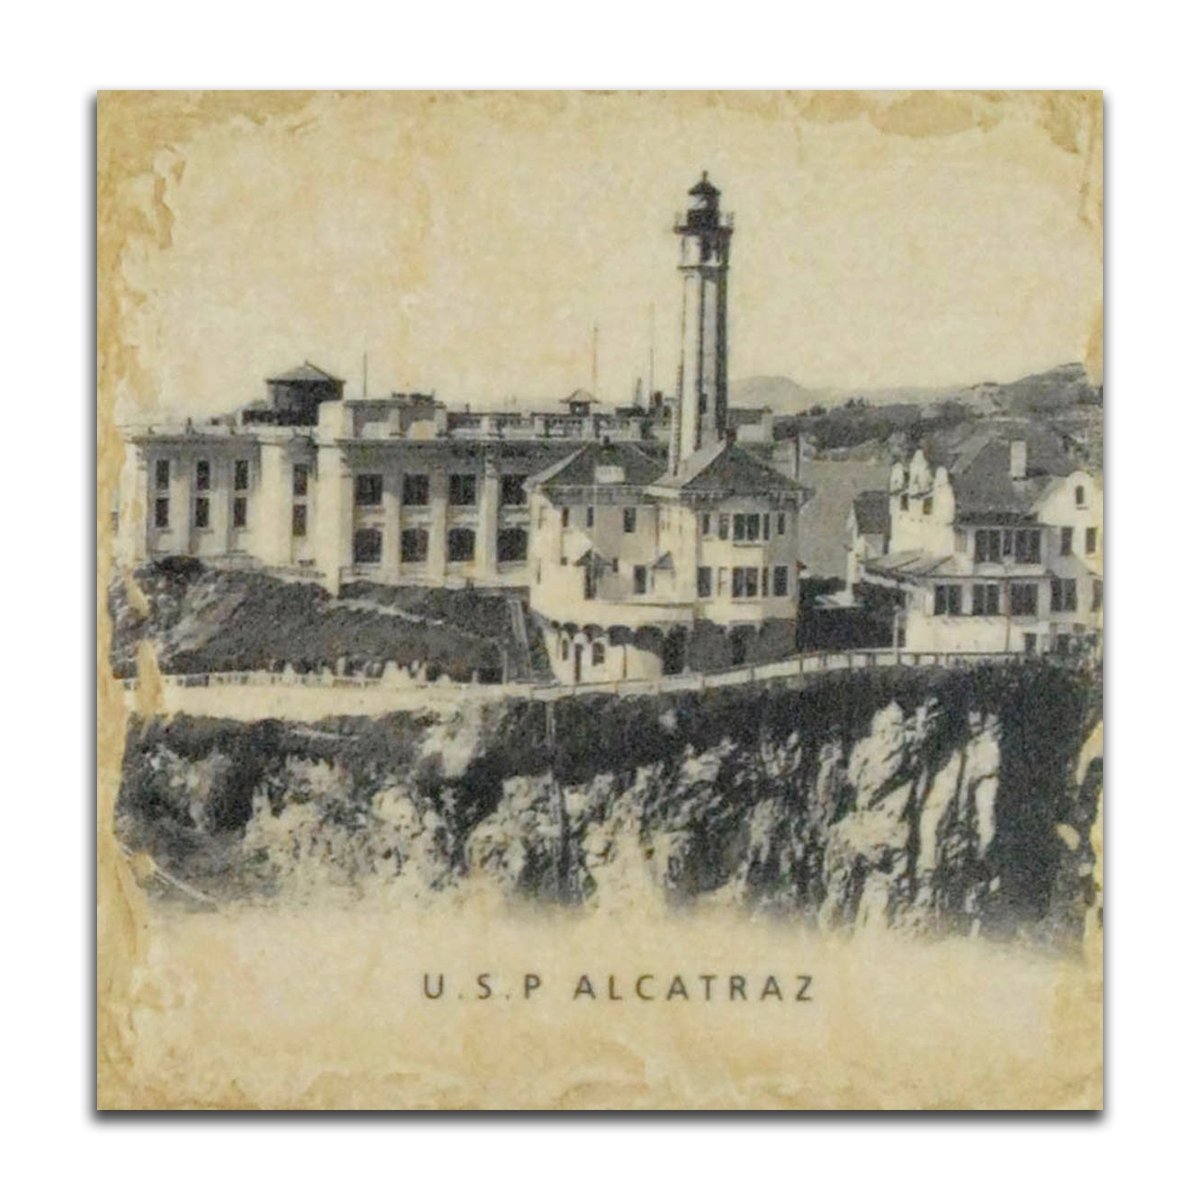 Vintage-inspired coaster featuring an historical photo of USP Alcatraz lighthouse, tumbled marble with weathered finish.